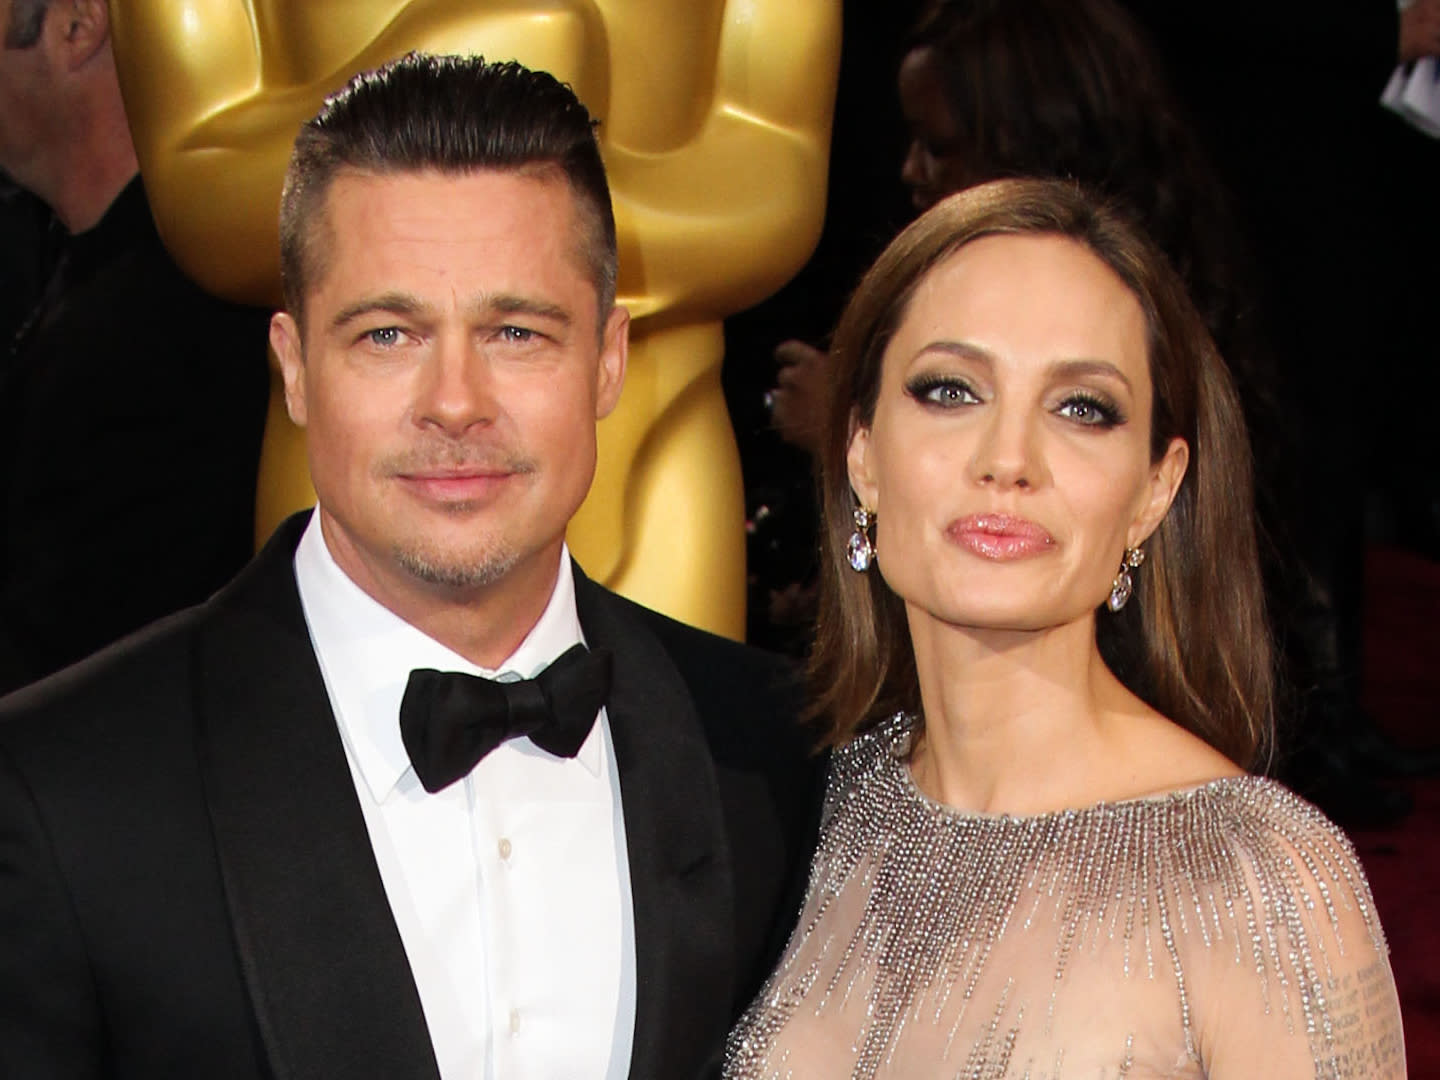 After Angelina Jolie’s allegations of marital abuse, Brad Pitt is feeling ‘isolated’ from his children